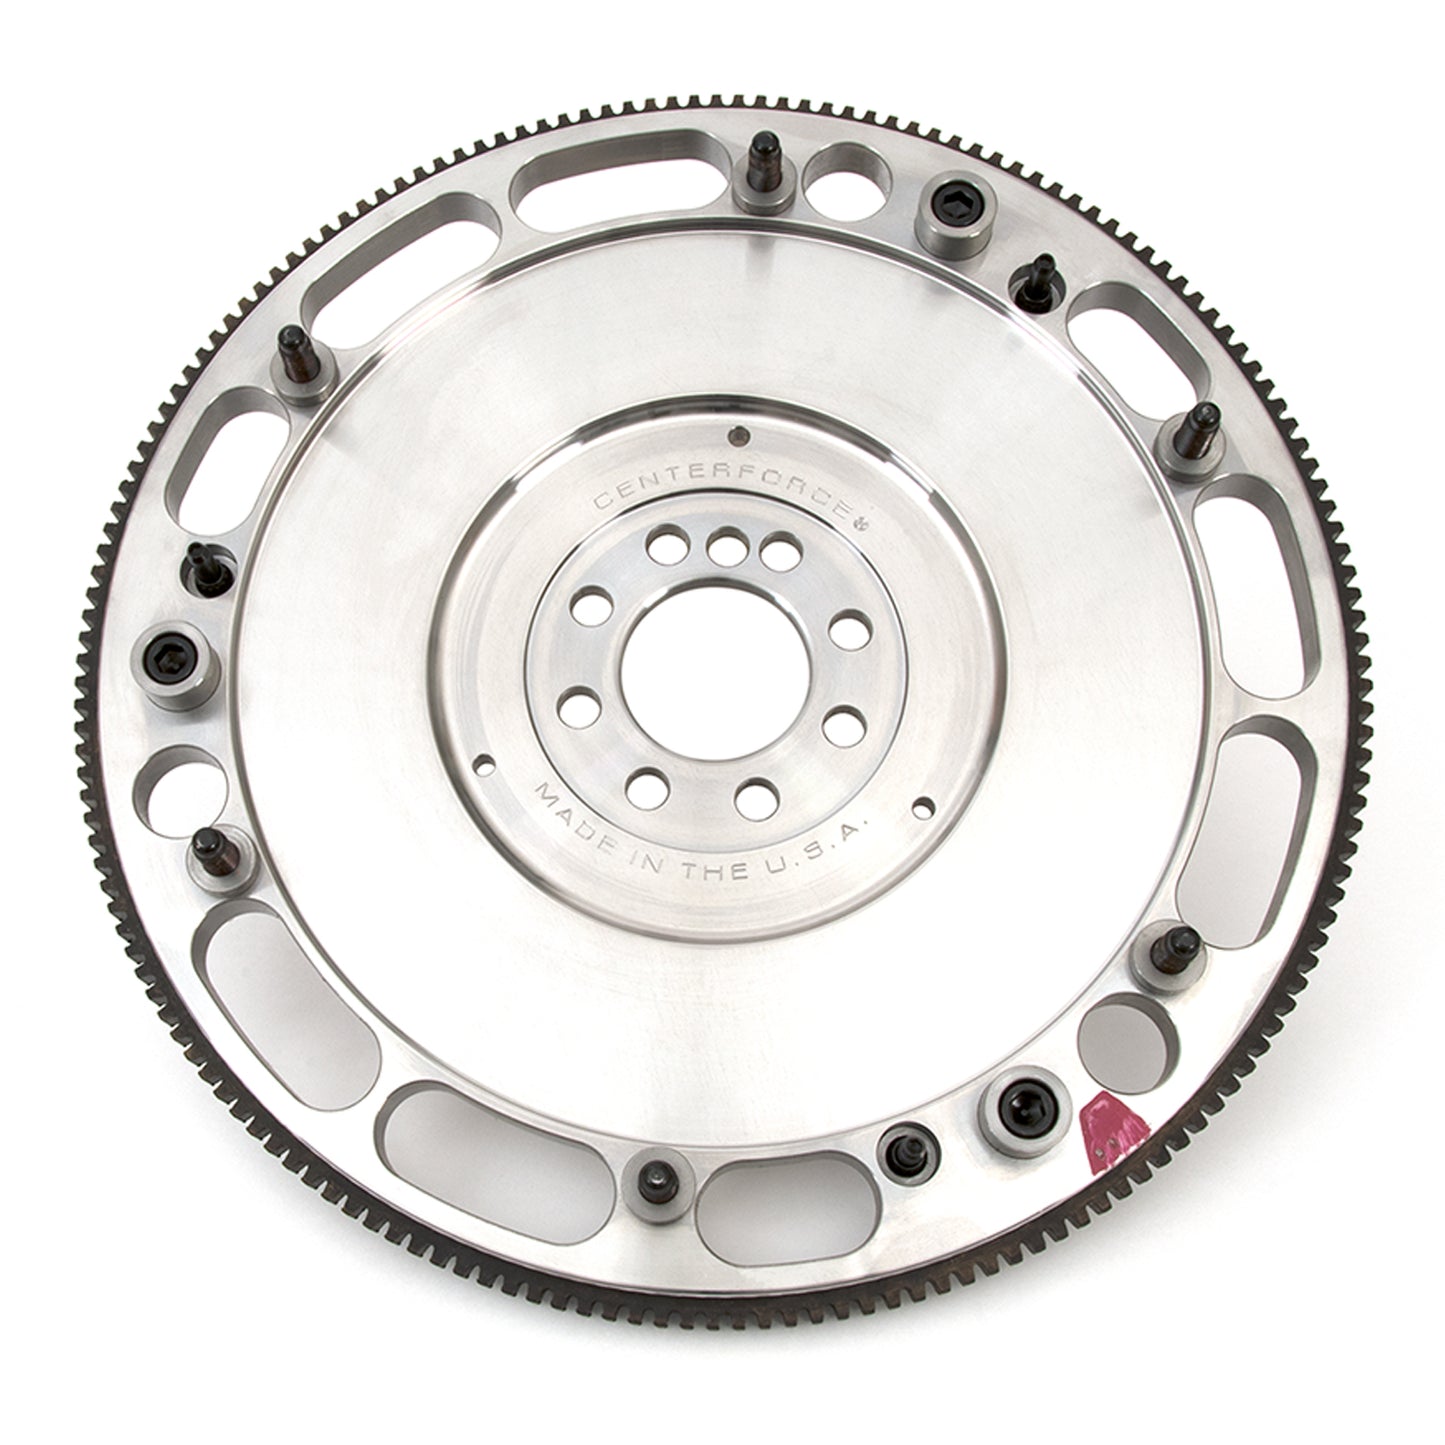 PN: 413614844 - DYAD DS 10.4 Clutch and Flywheel Kit